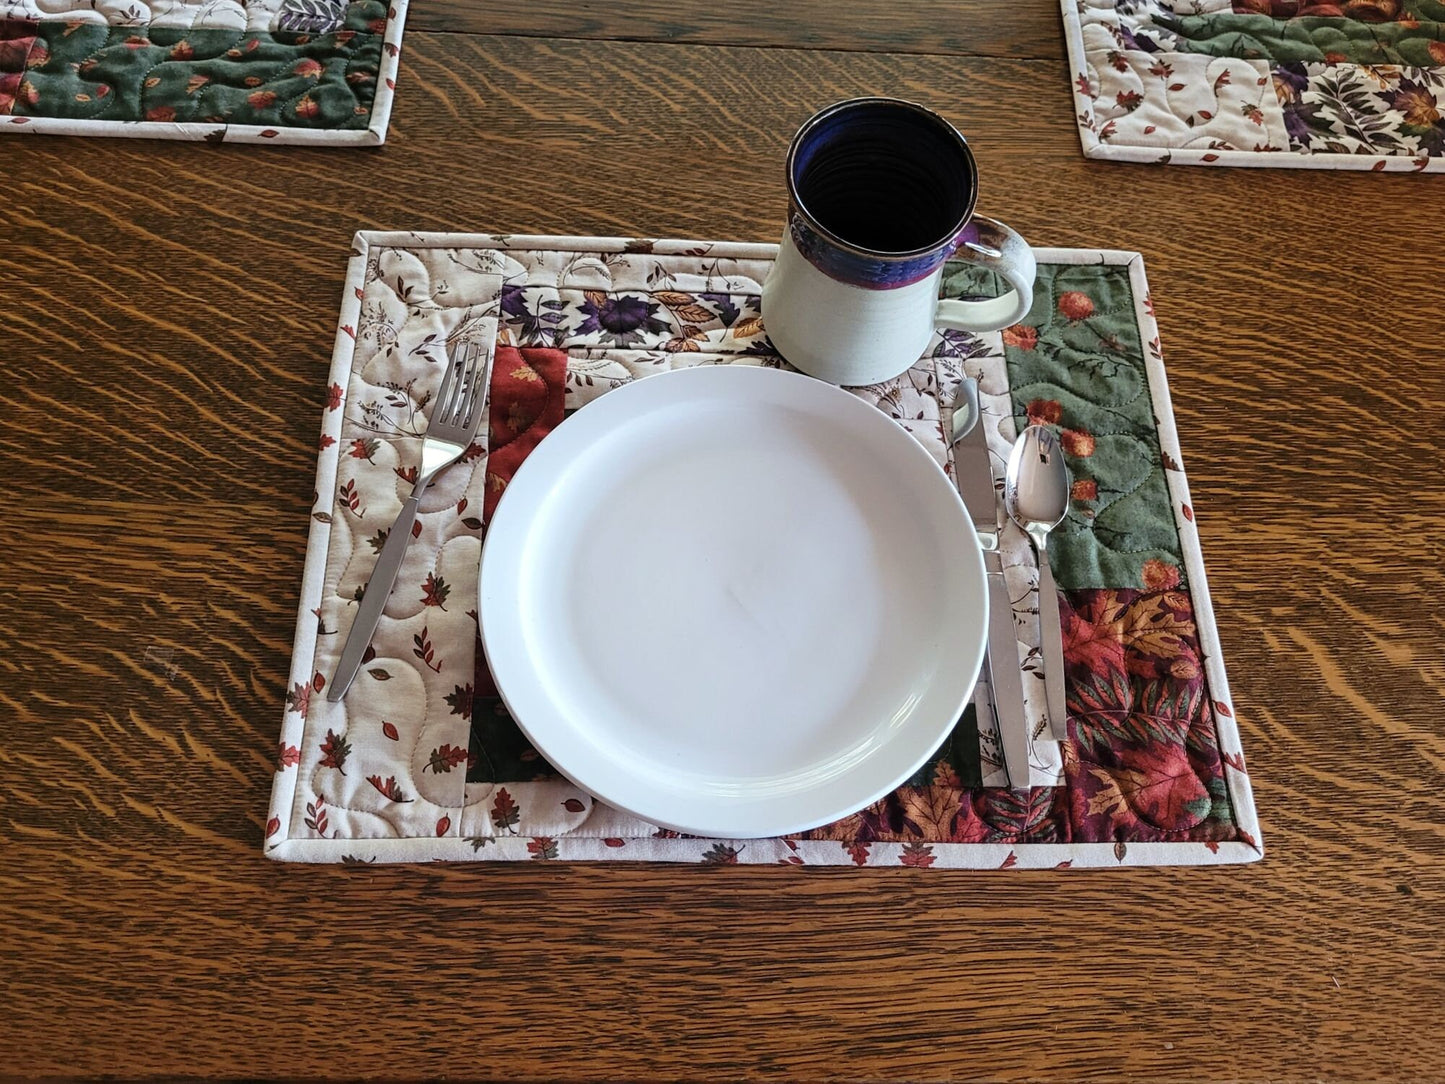 large quilted table mats fit whole place setting